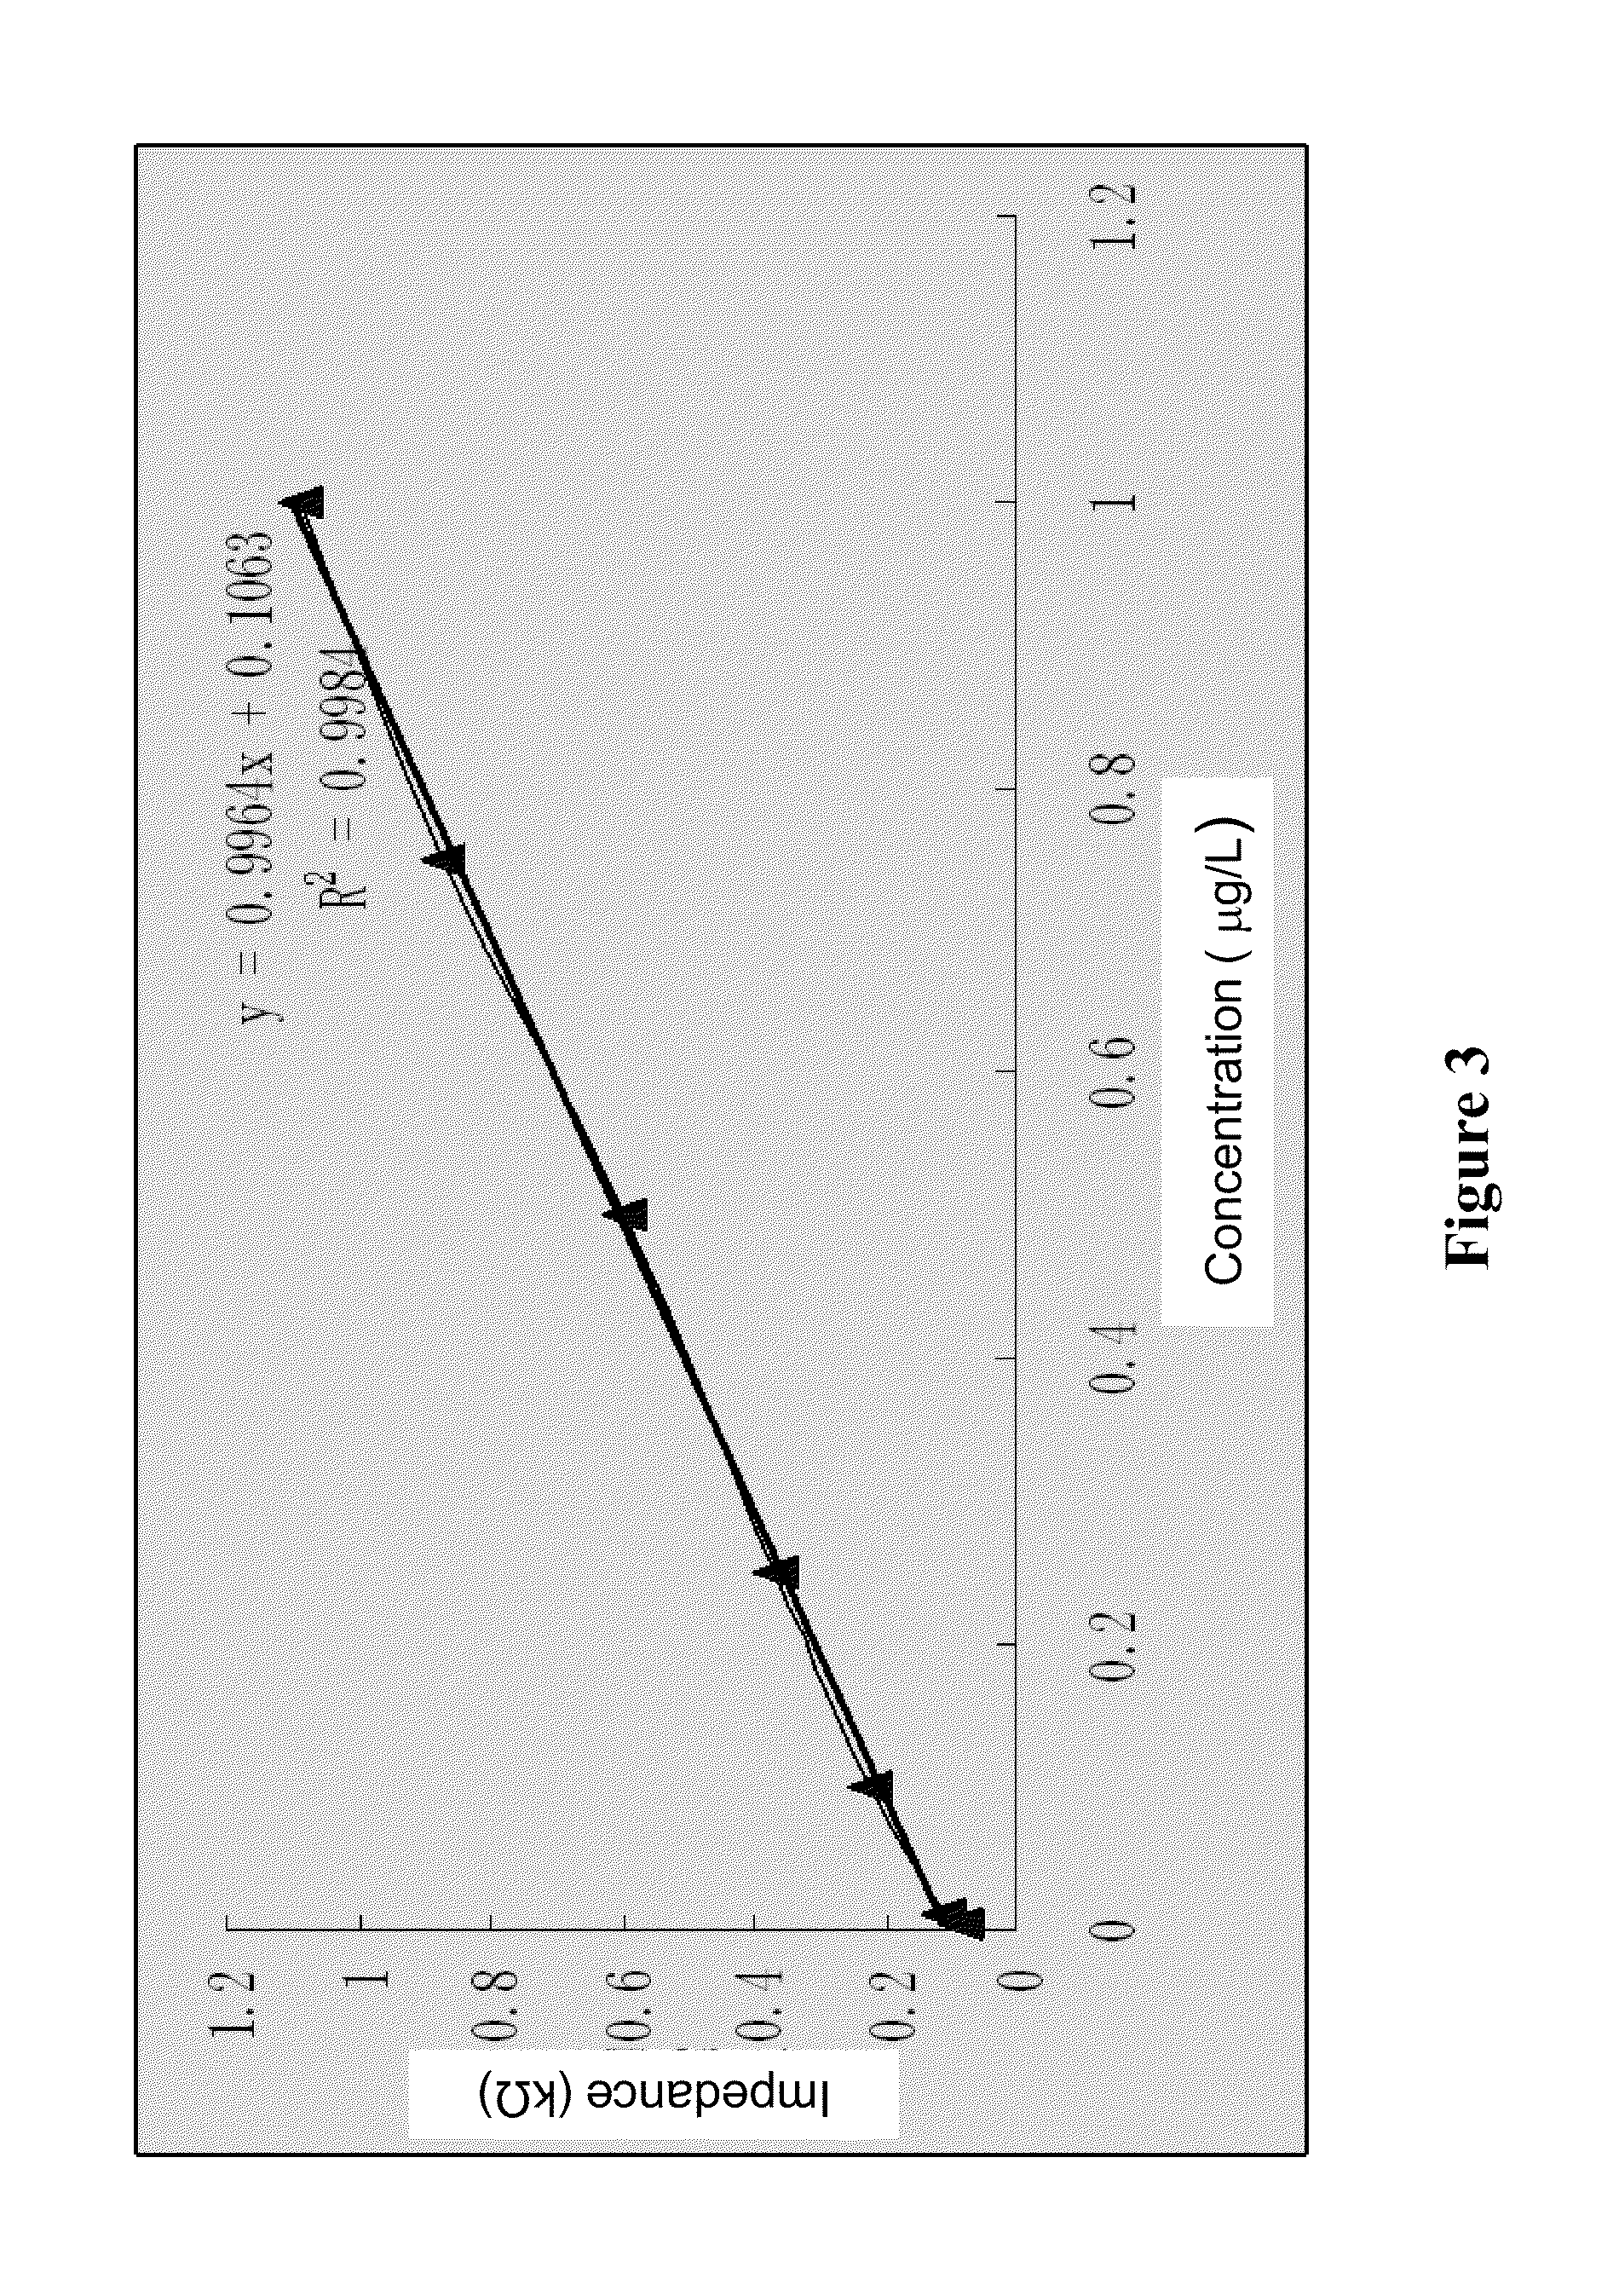 Antibody Protective Agent And Methods Of Using Same